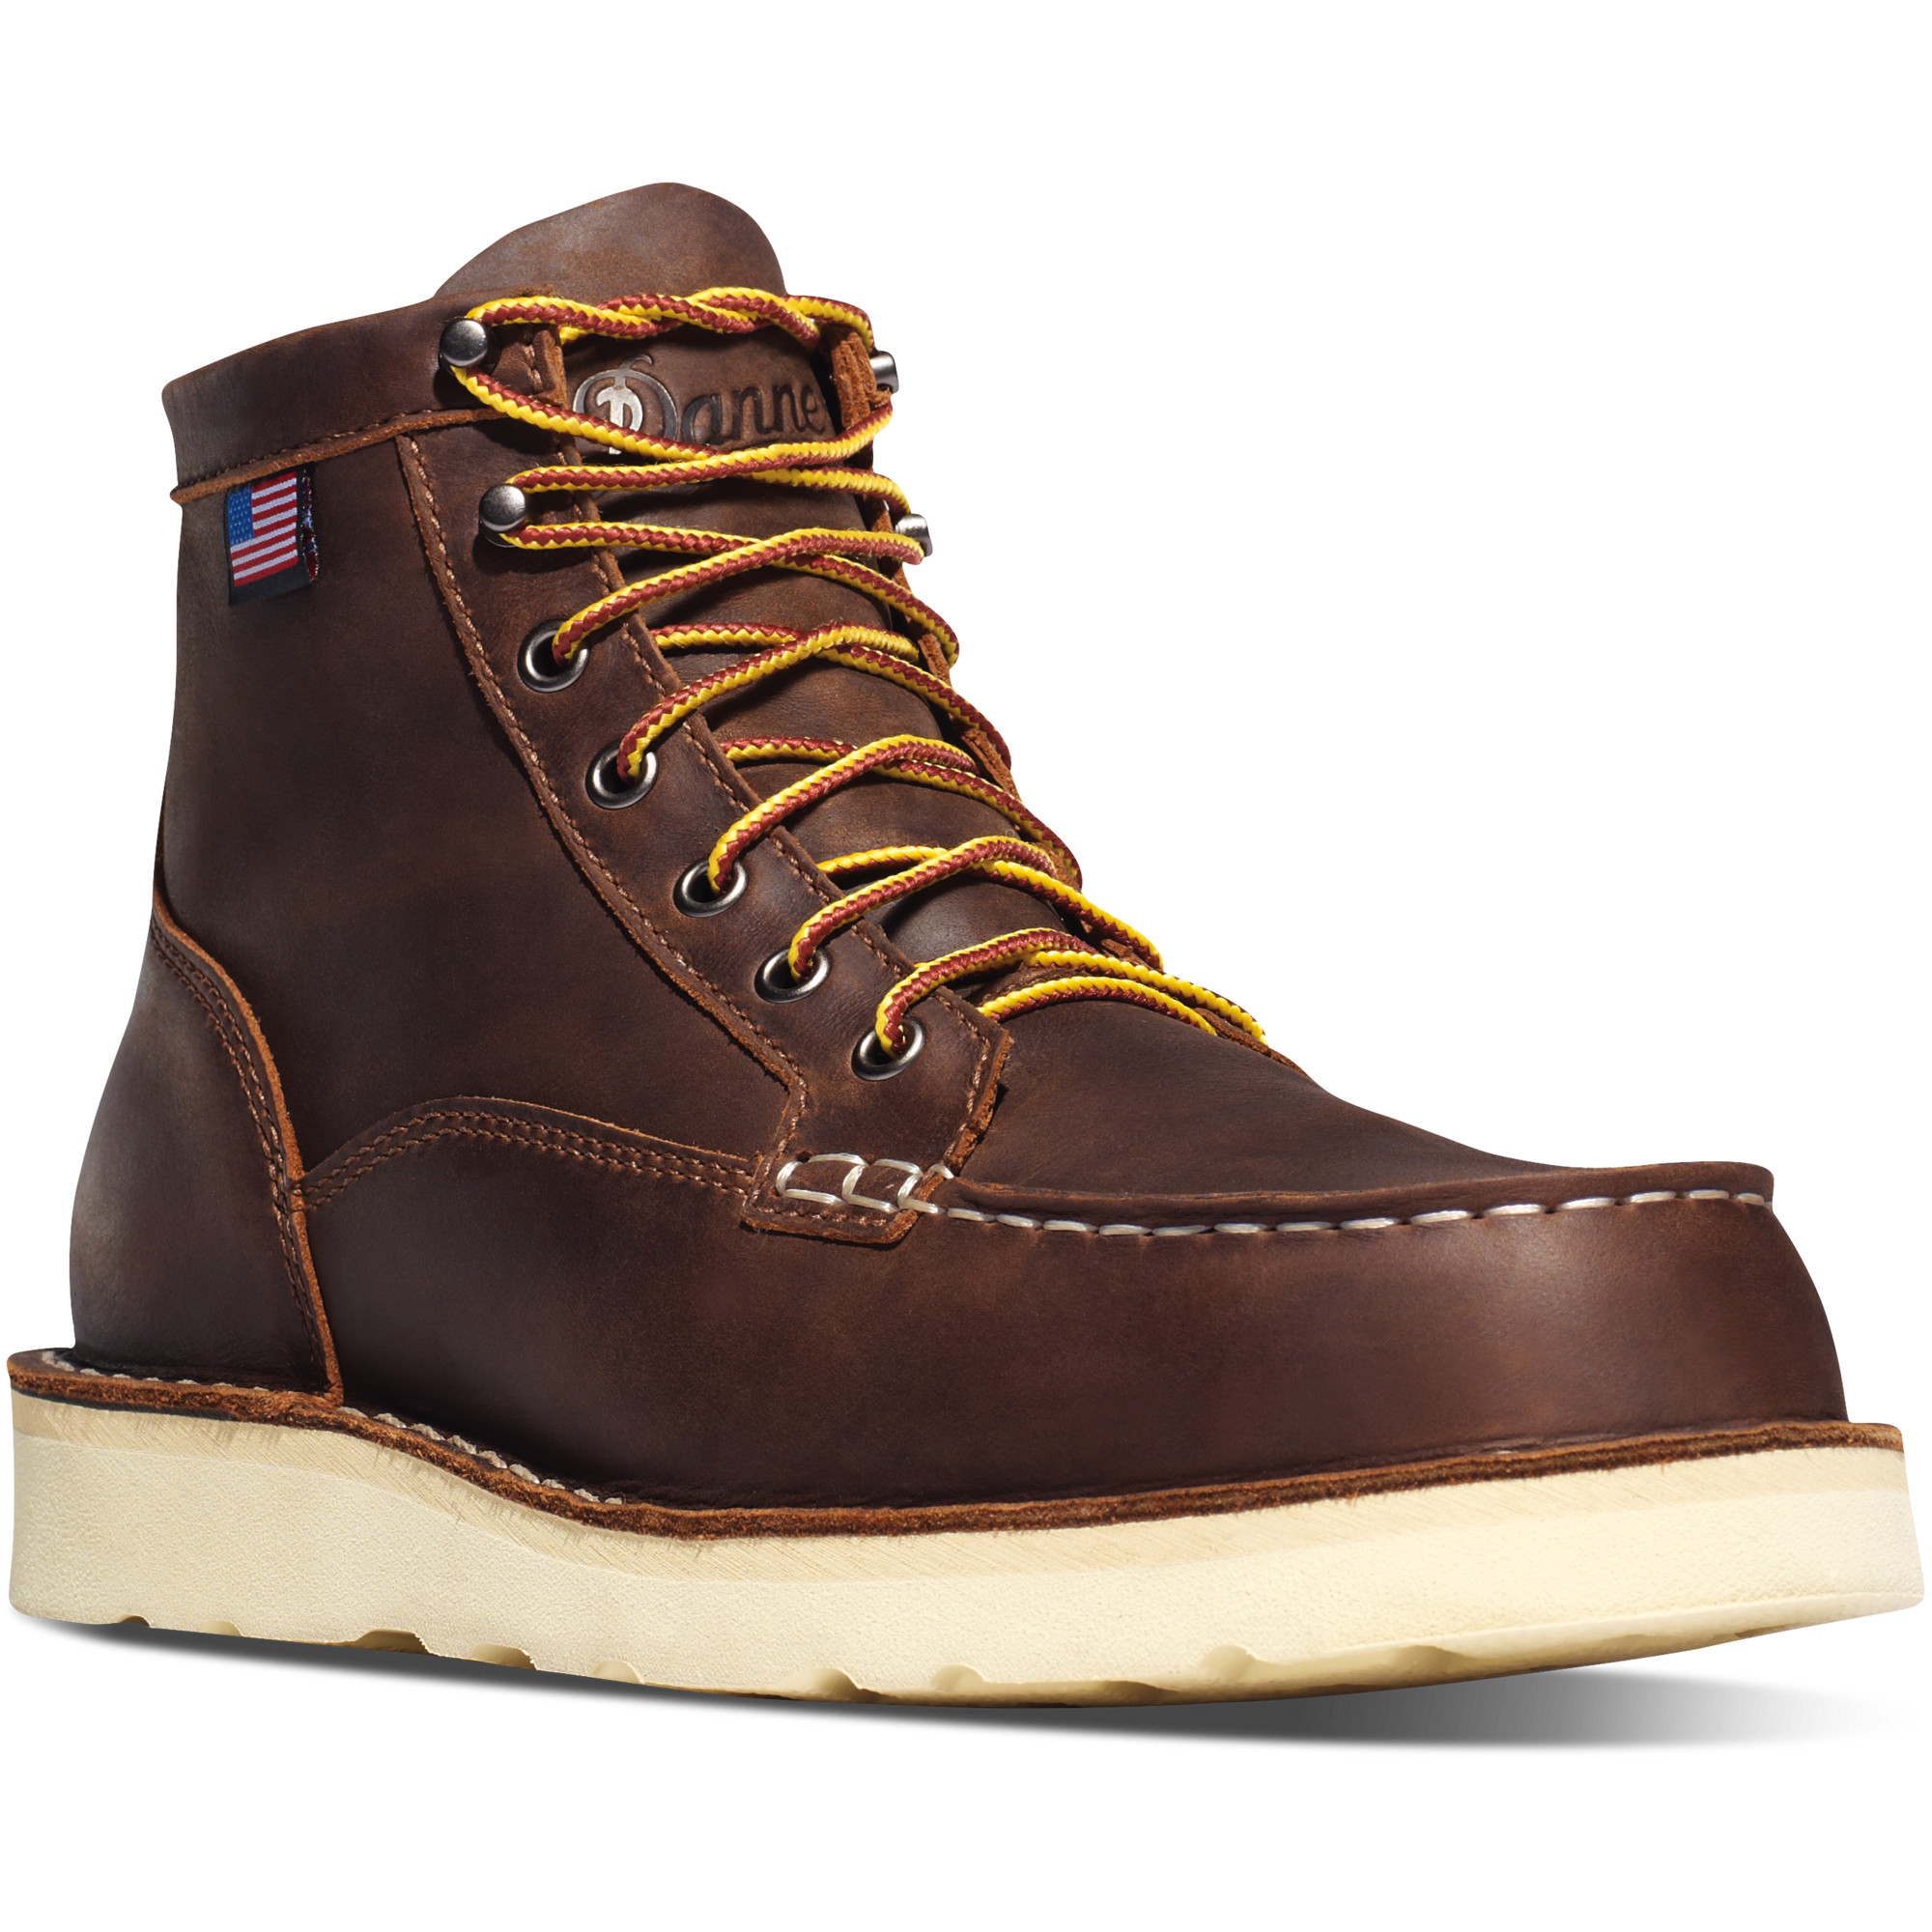 Danner Bull Run Moc Toe Boots from Columbia Safety